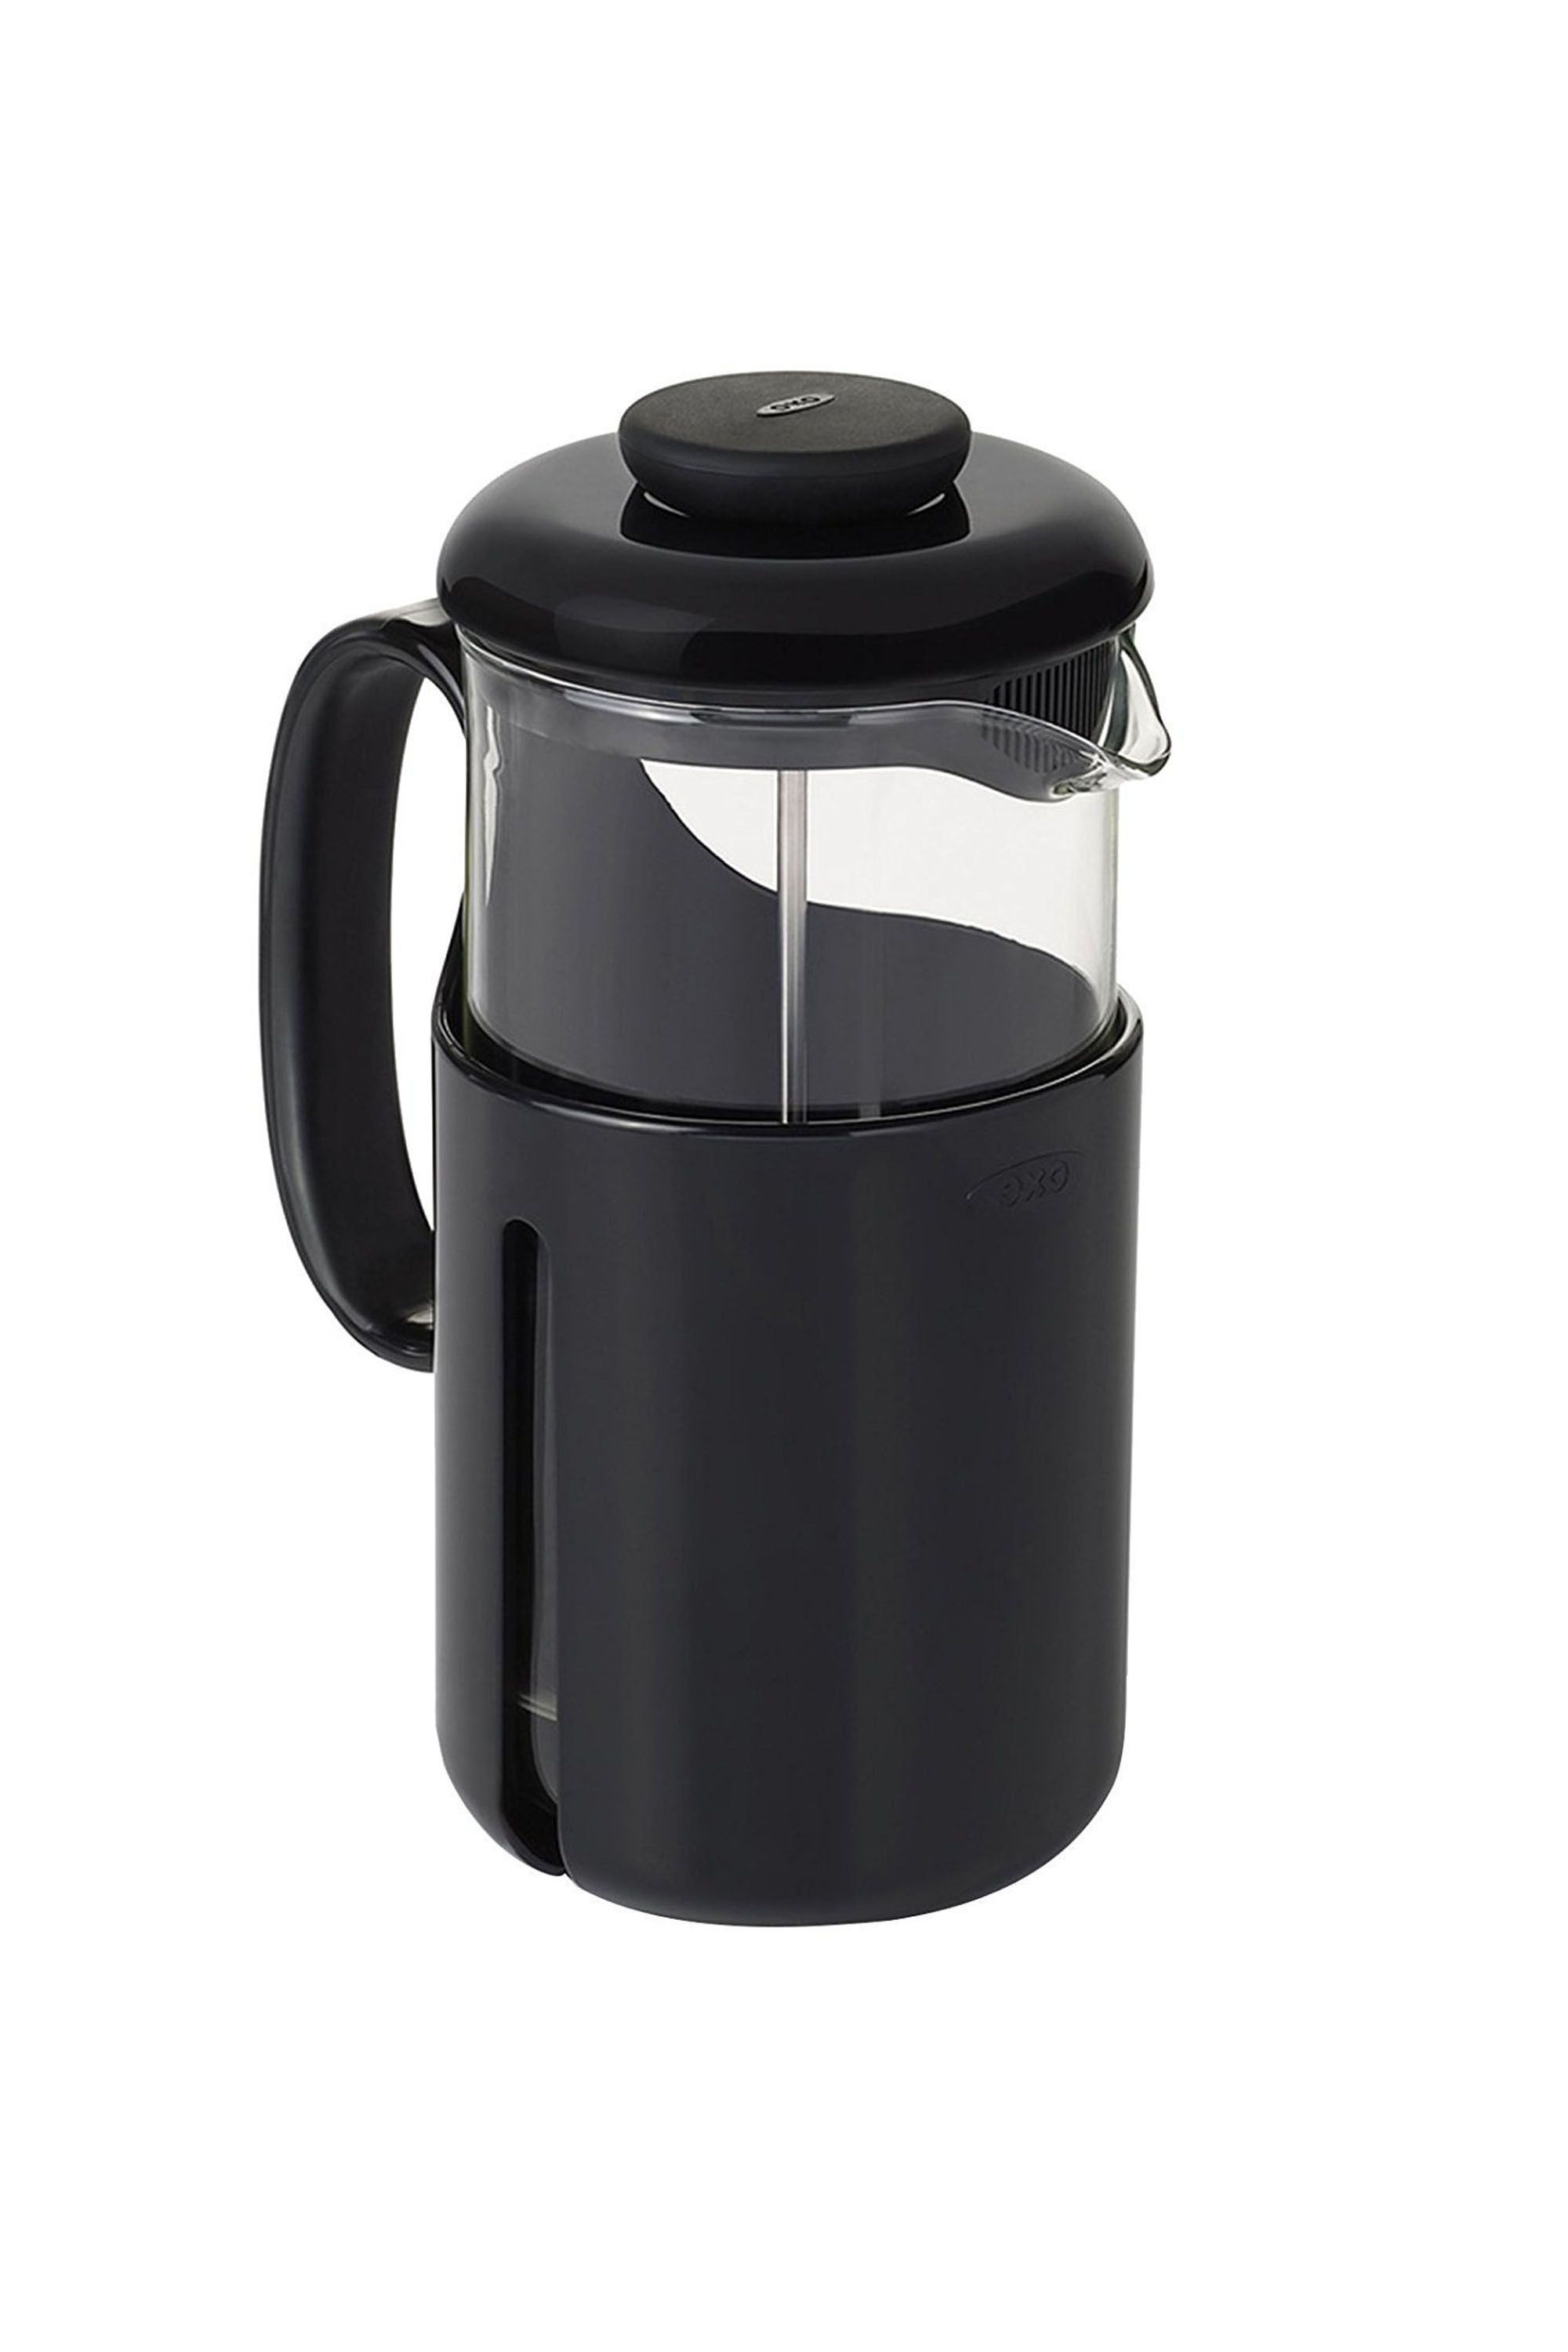 TEBICOO 16oz Camping Coffee Maker Pour Over Set with Black